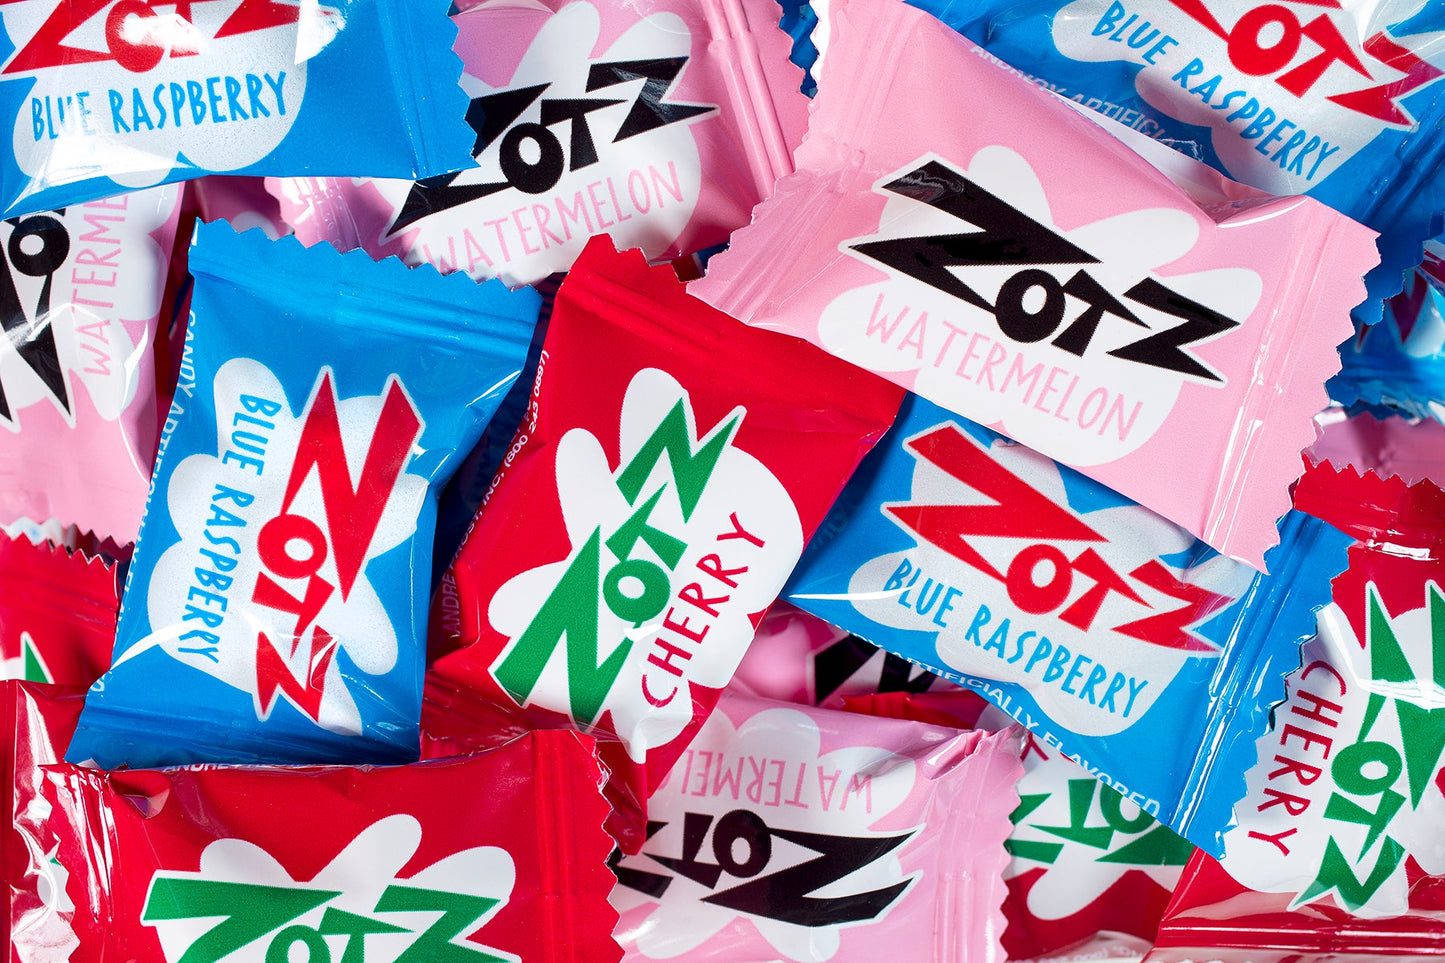 ZOTZ Assorted Flavors, CASE of 12/46 count bags